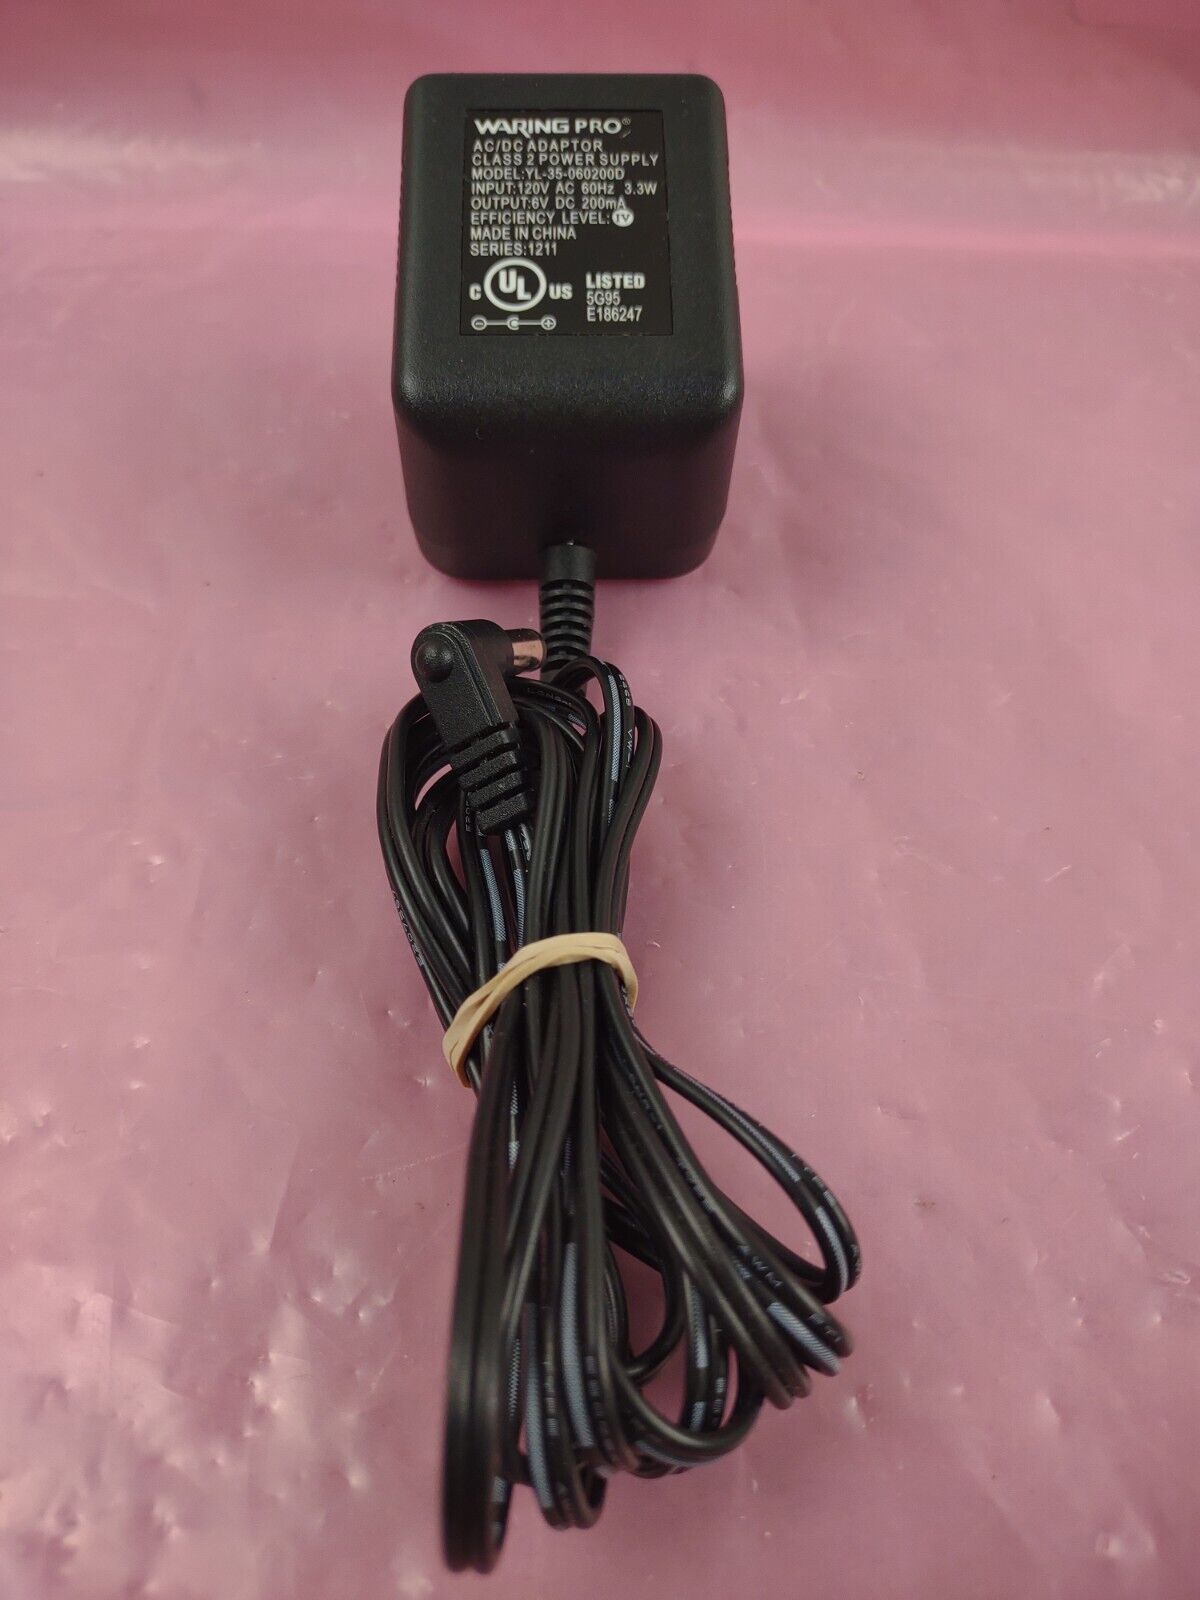 *Brand NEW*Waring Pro Power Supply Adapter Model: YL-35-060200D Output: 6V DC 200mA